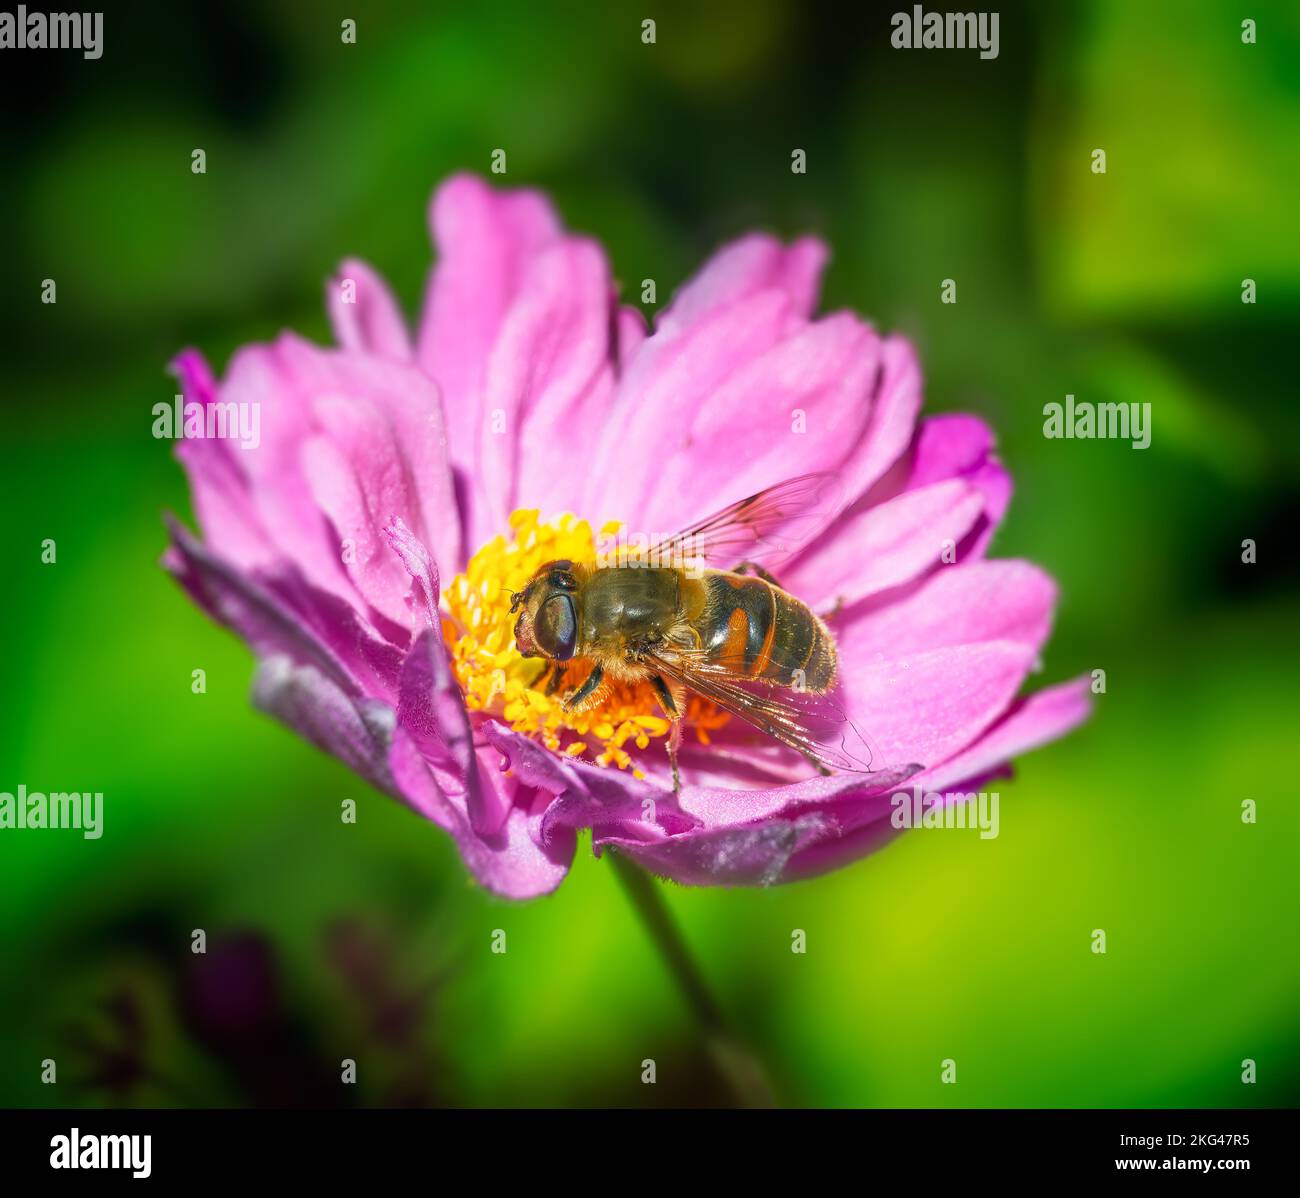 Macro of a hoverfly on pink anemone flower Stock Photo